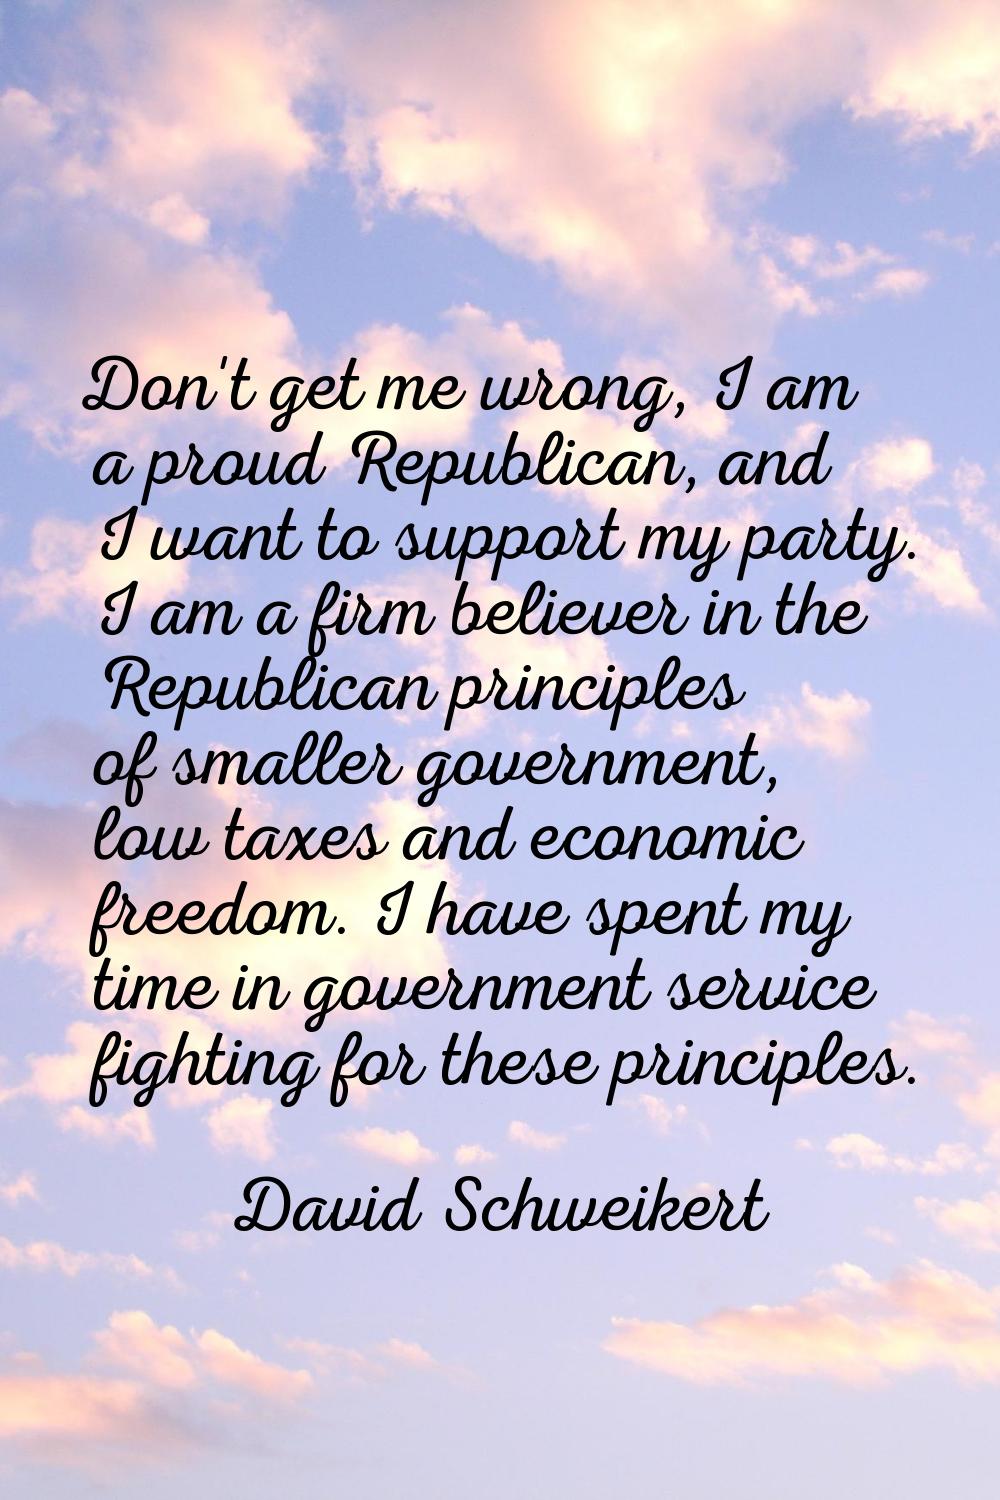 Don't get me wrong, I am a proud Republican, and I want to support my party. I am a firm believer i